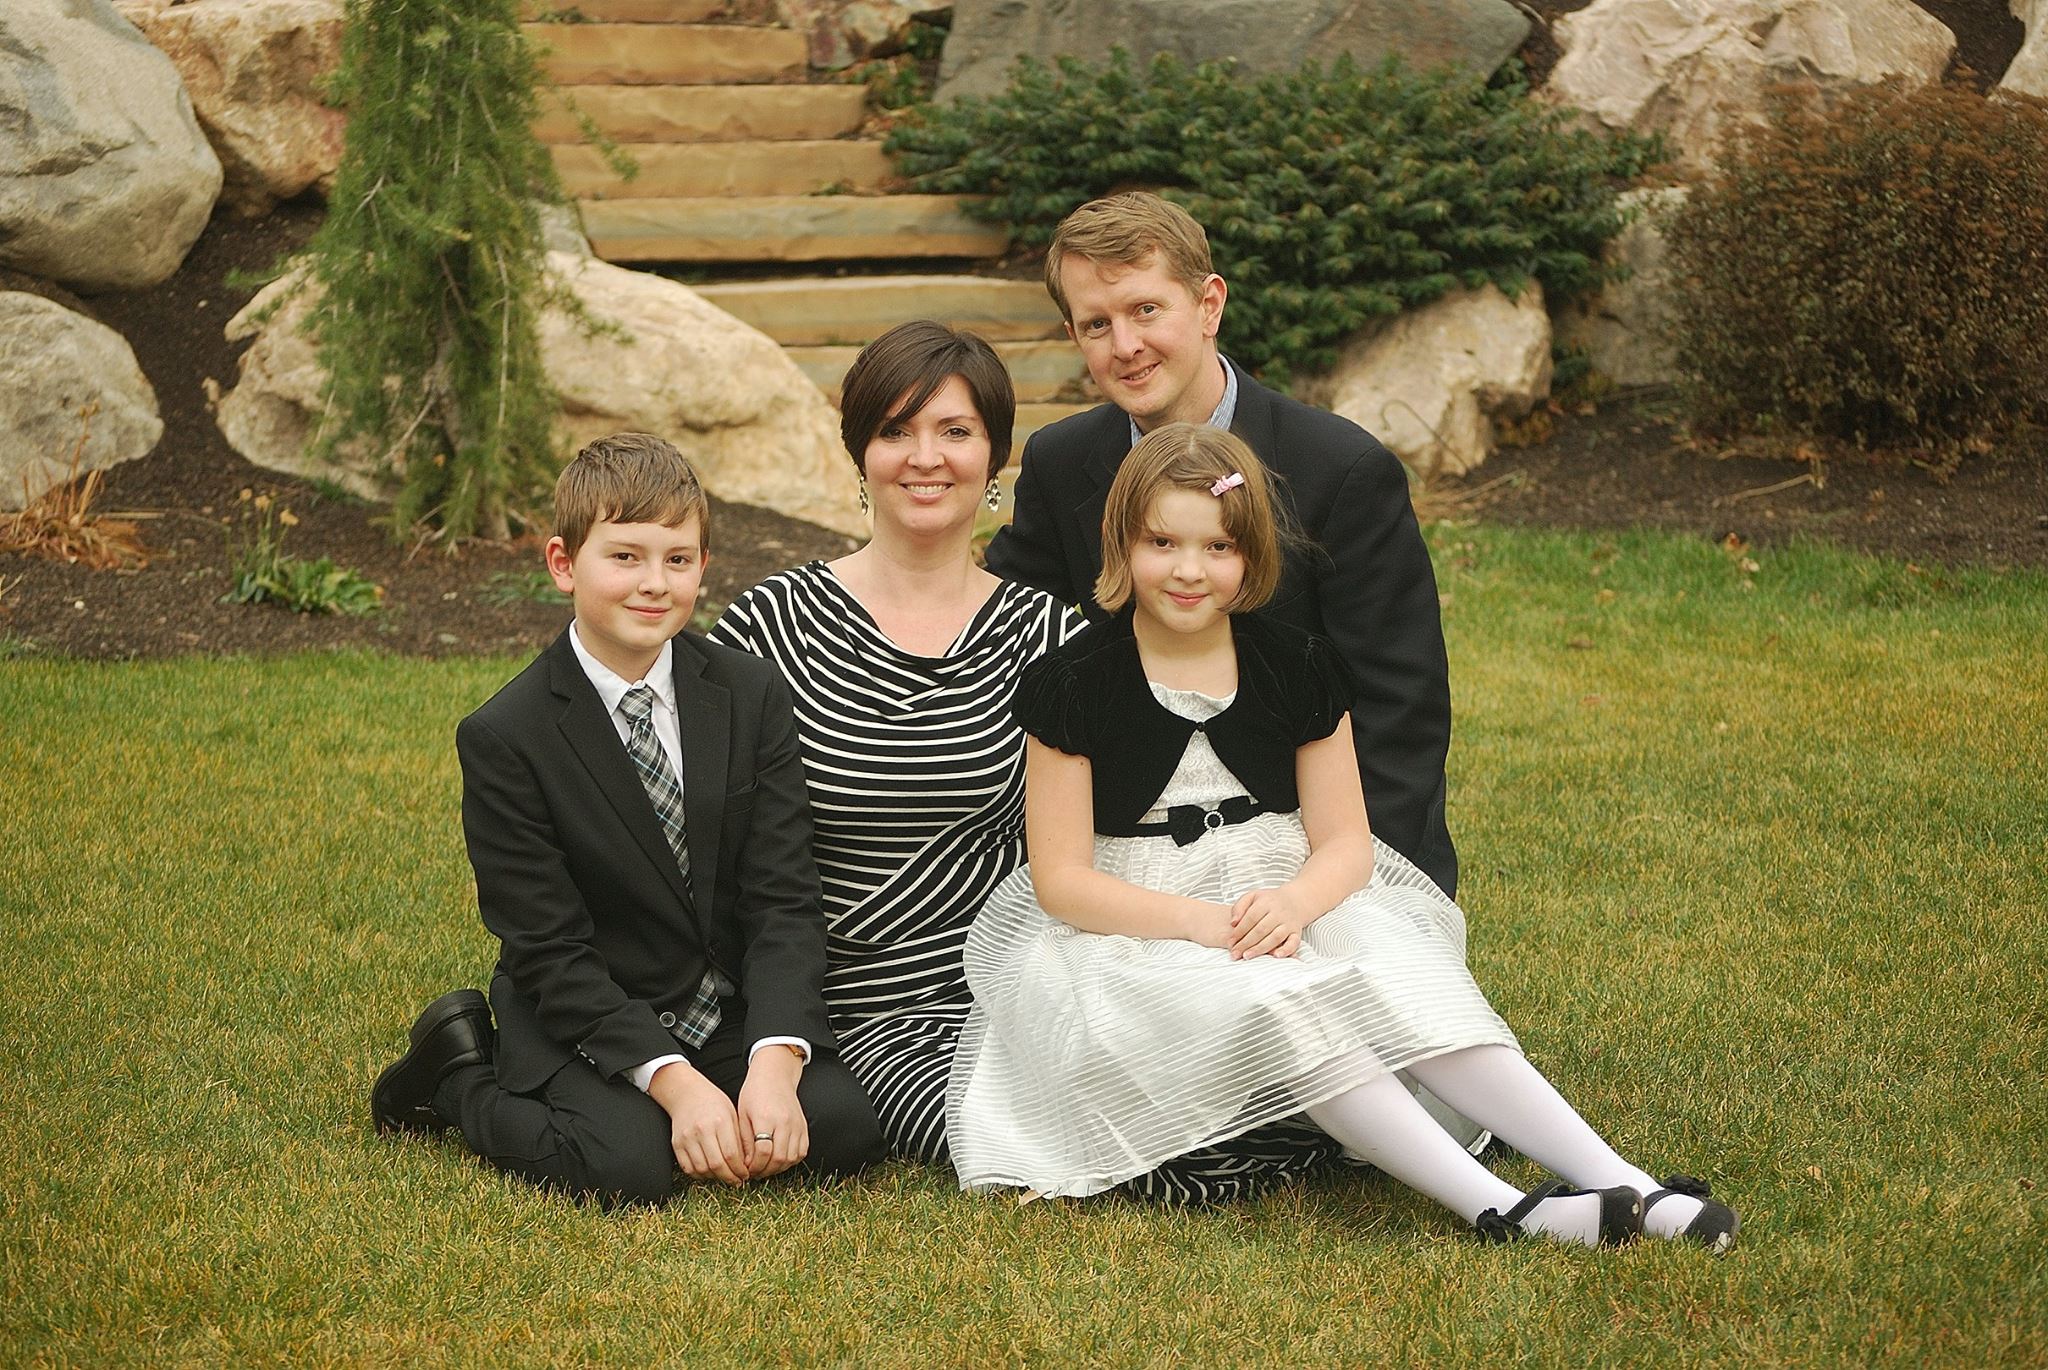 Ken Jennings’ Kids & Family 5 Fast Facts You Need to Know